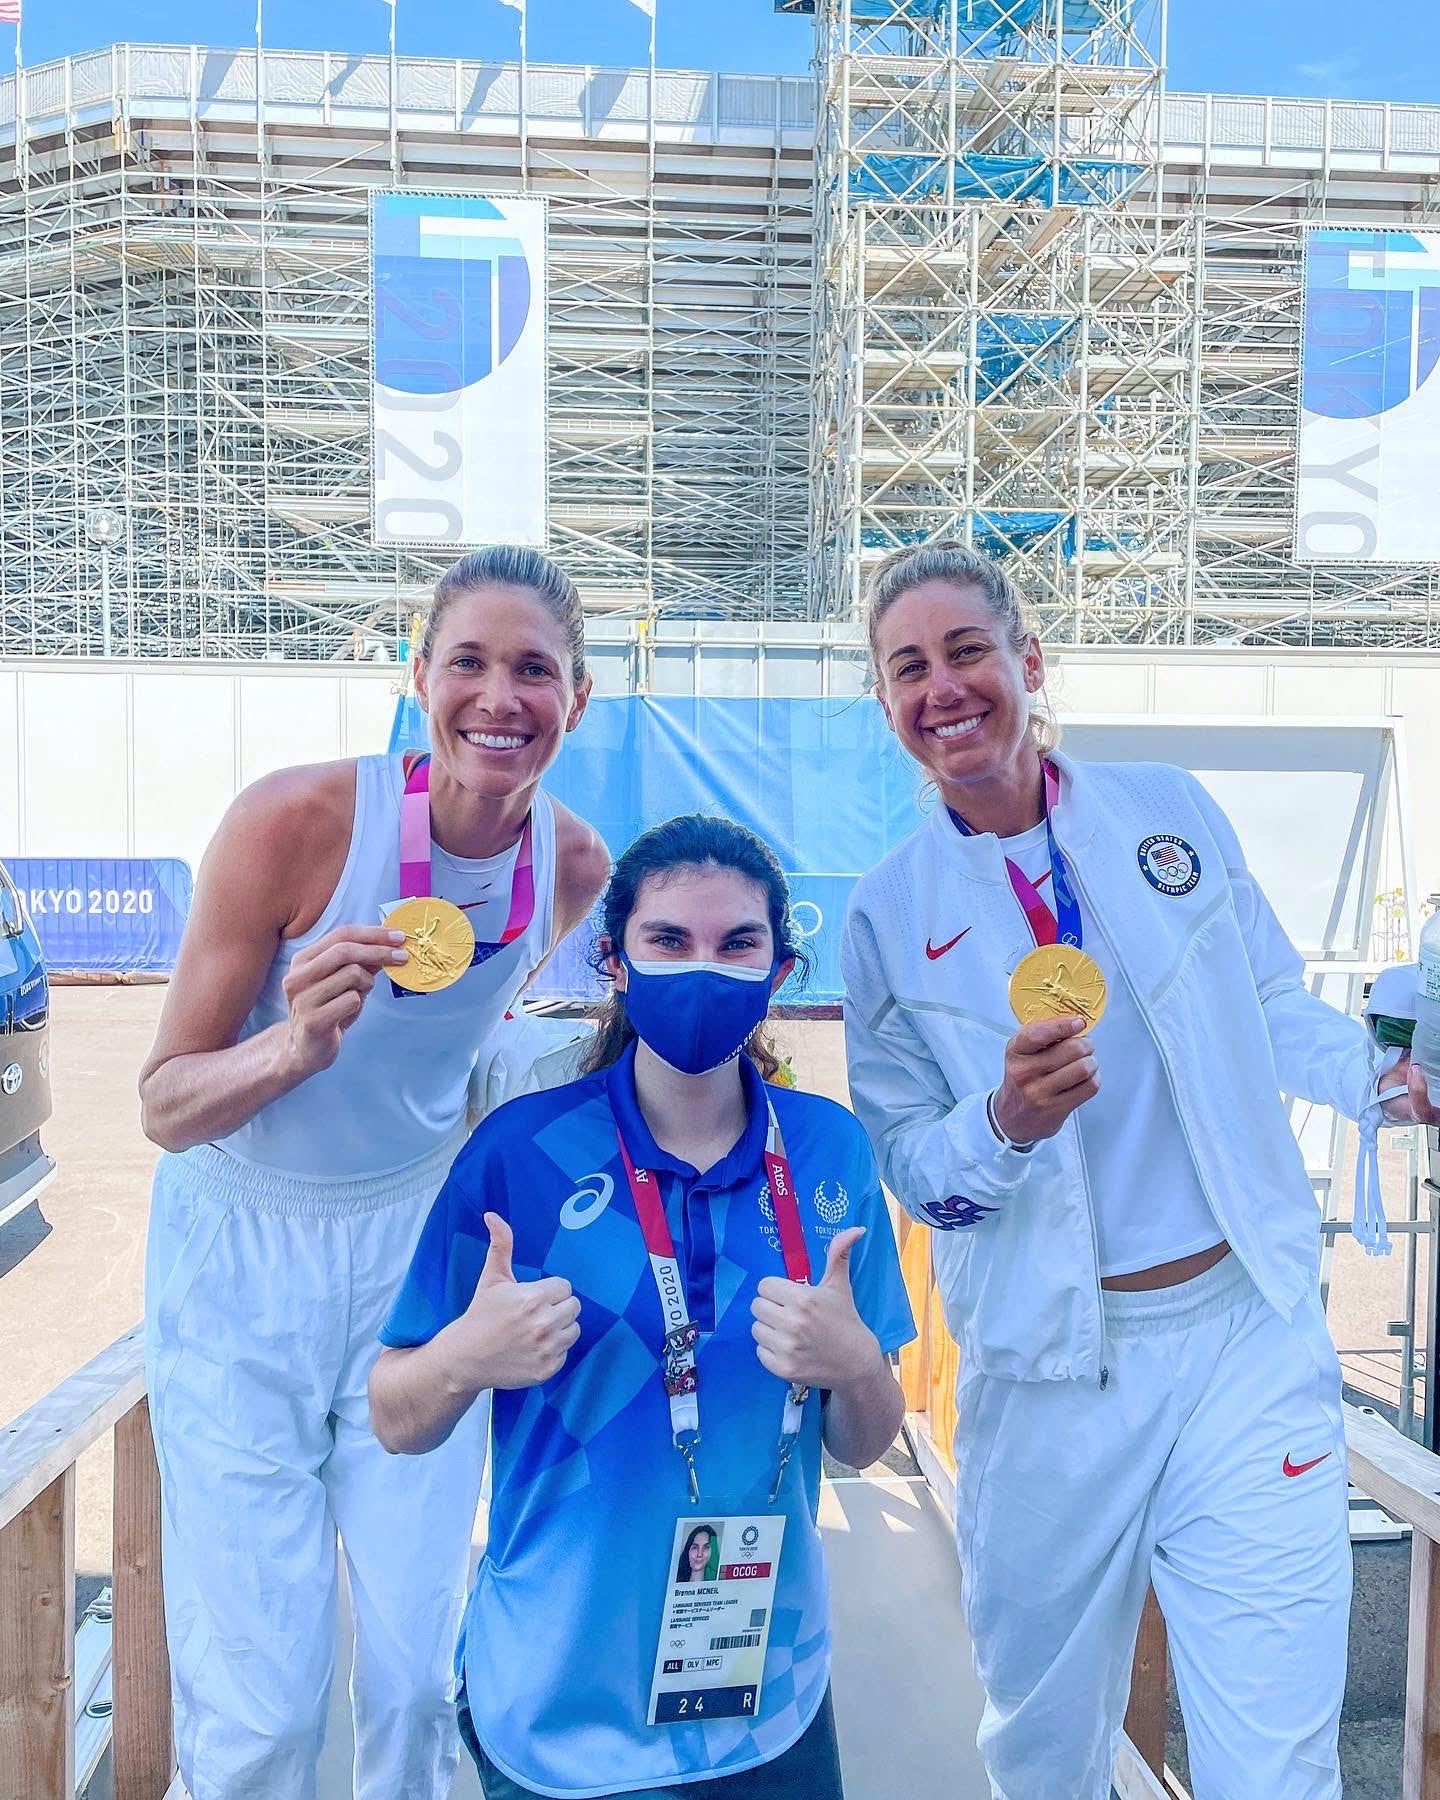 Brenna McNeil in Tokyo with American women’s beach volleyball gold medalists April Ross and Alix Klineman.